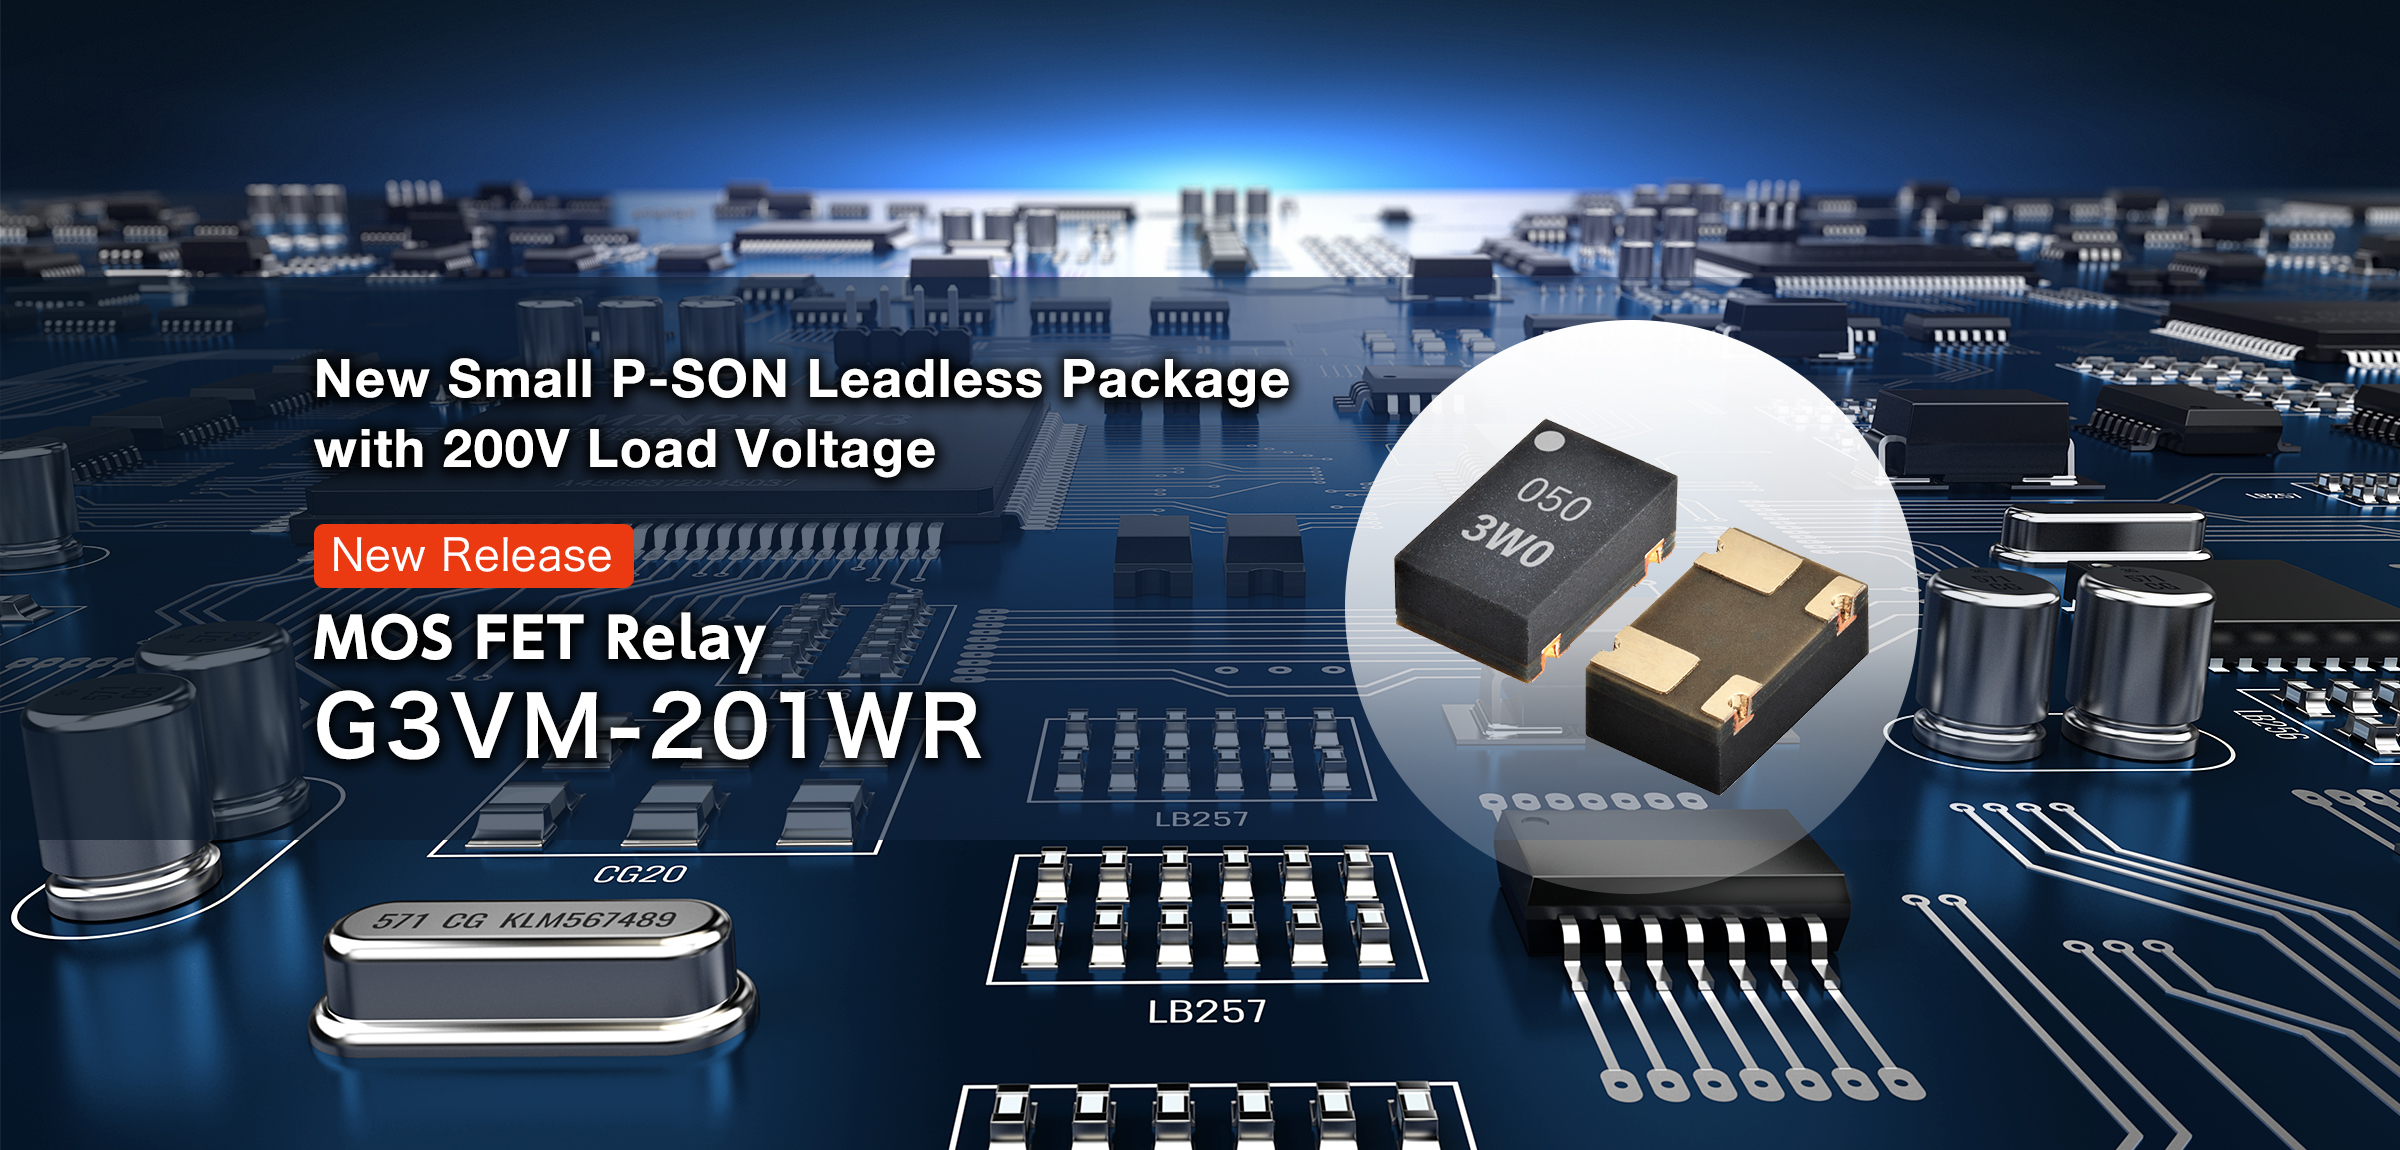 New Release MOS FET Relay G3VM-201WR New Small P-SON Leadless Package with 200v Load Voltage